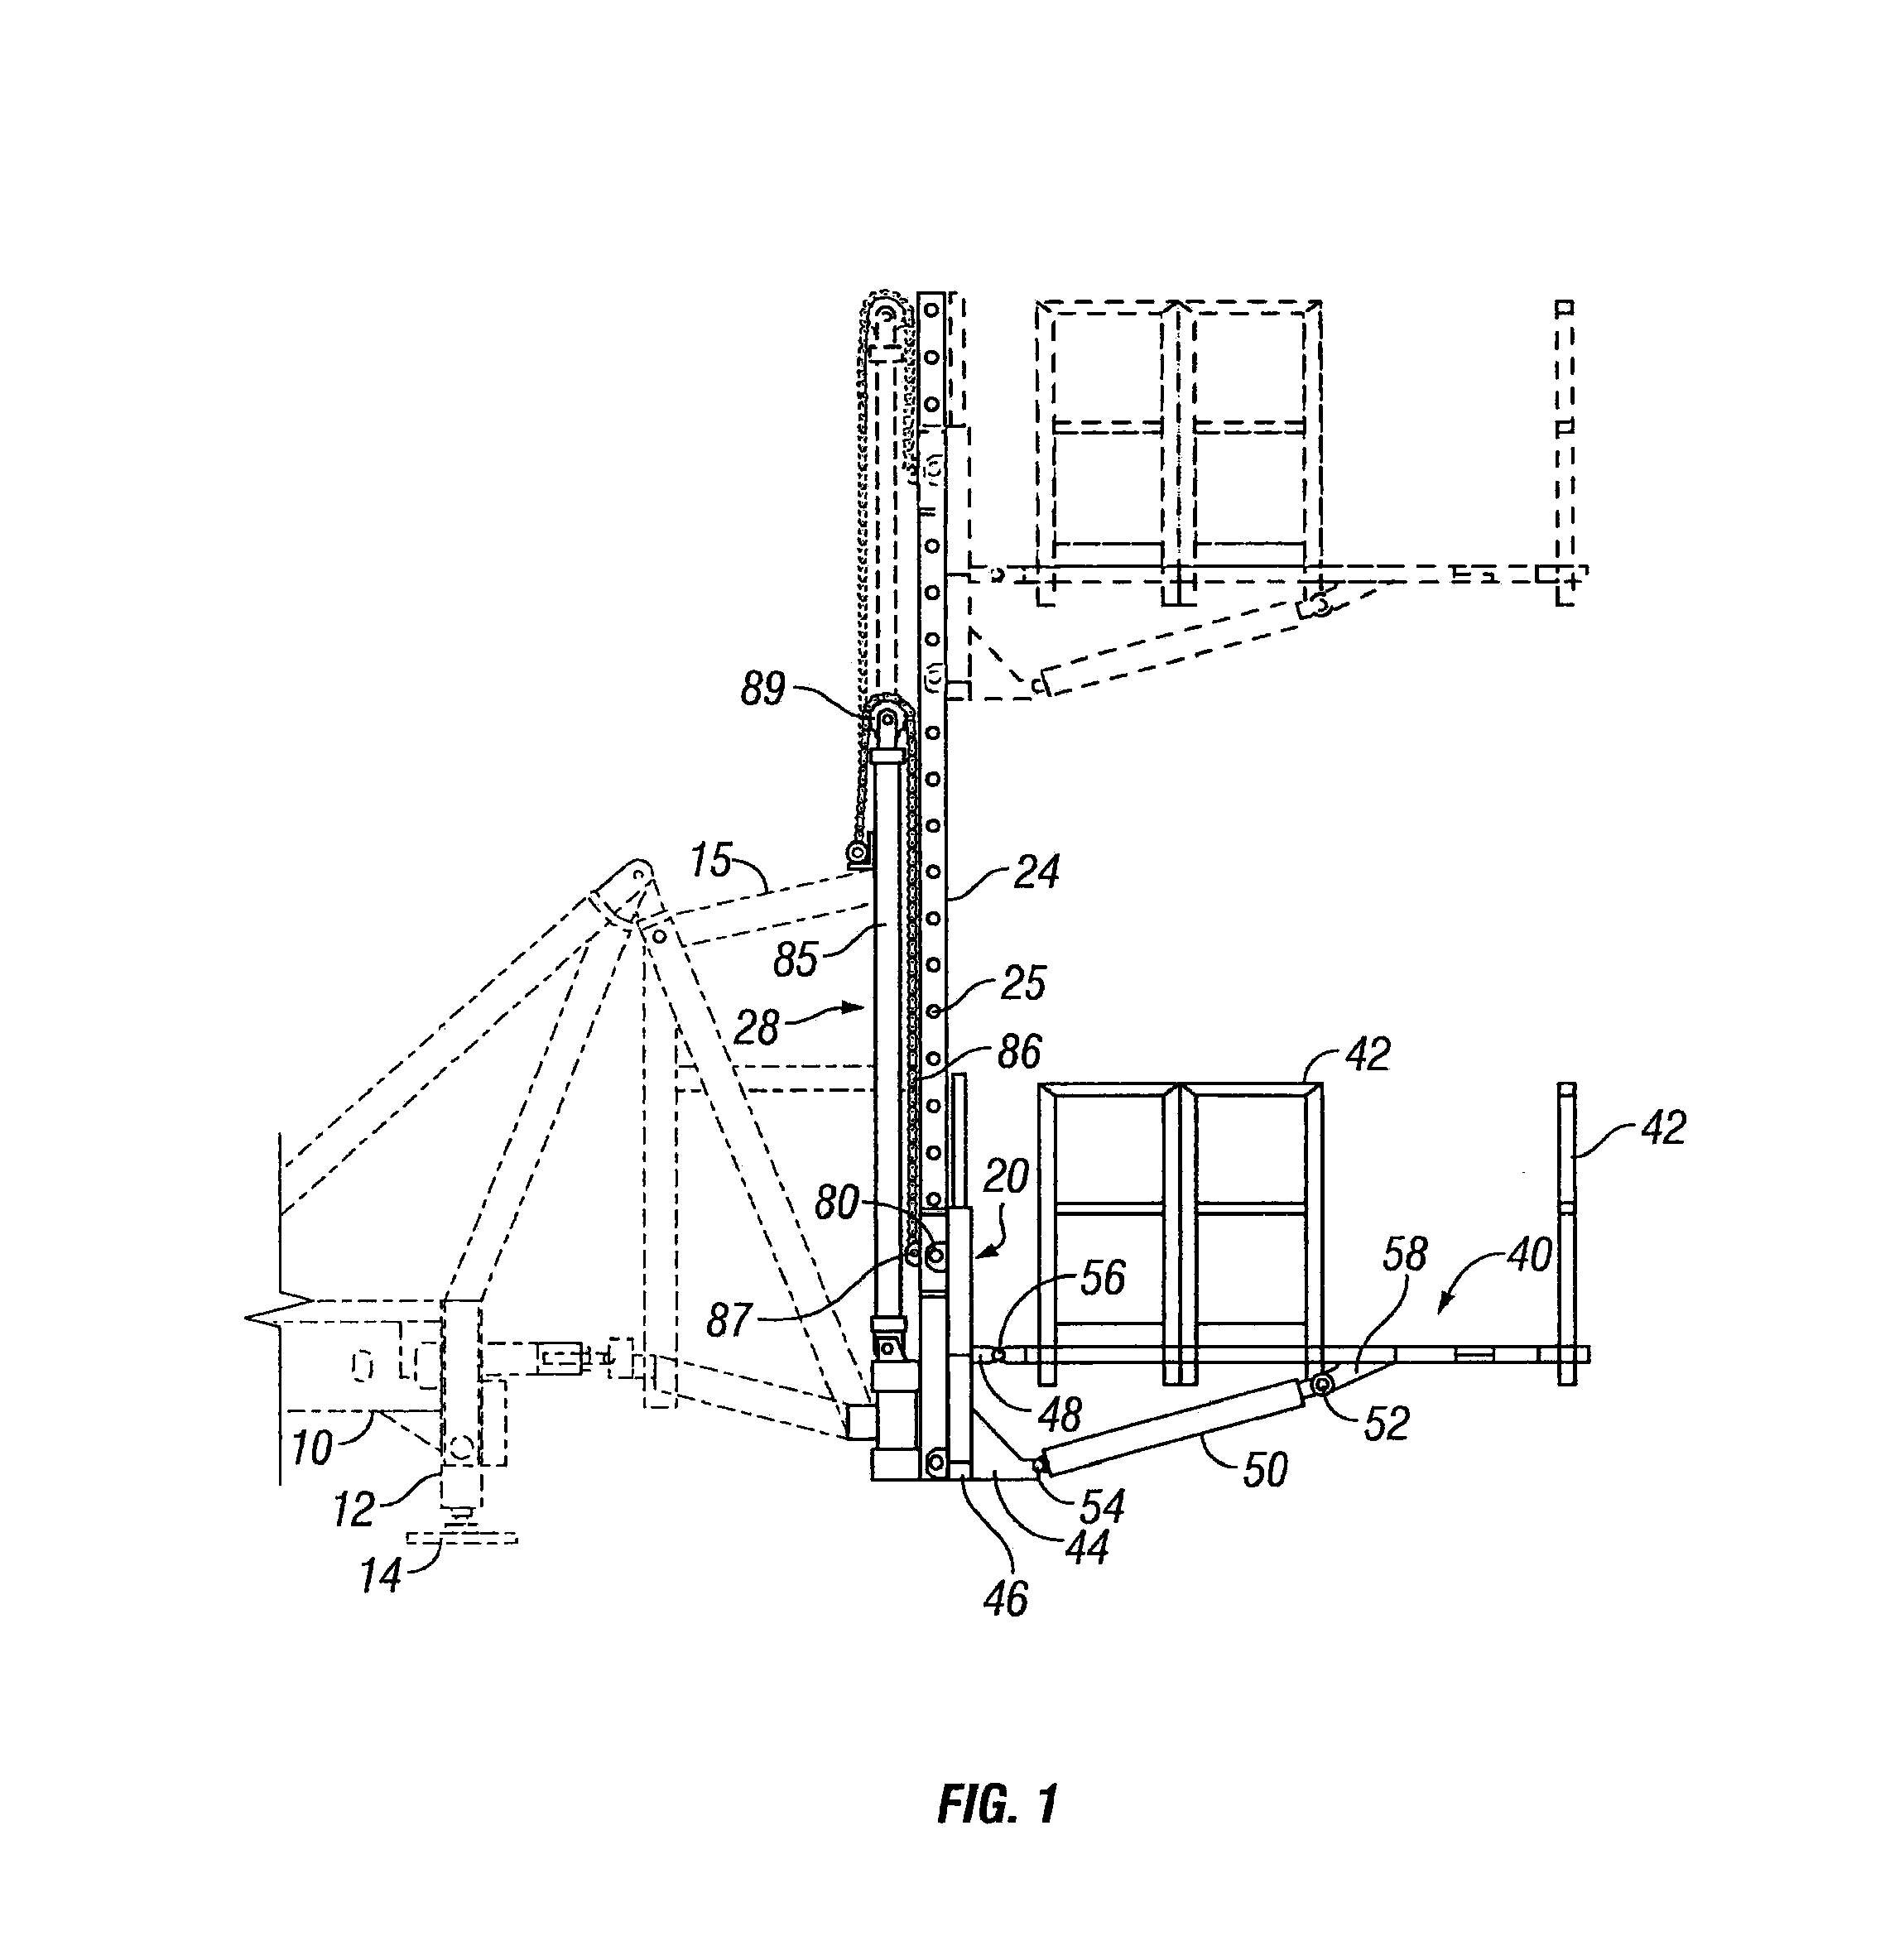 Automated System for Positioning and Supporting the Work Platform of a Mobile Workover and Well-Servicing Rig